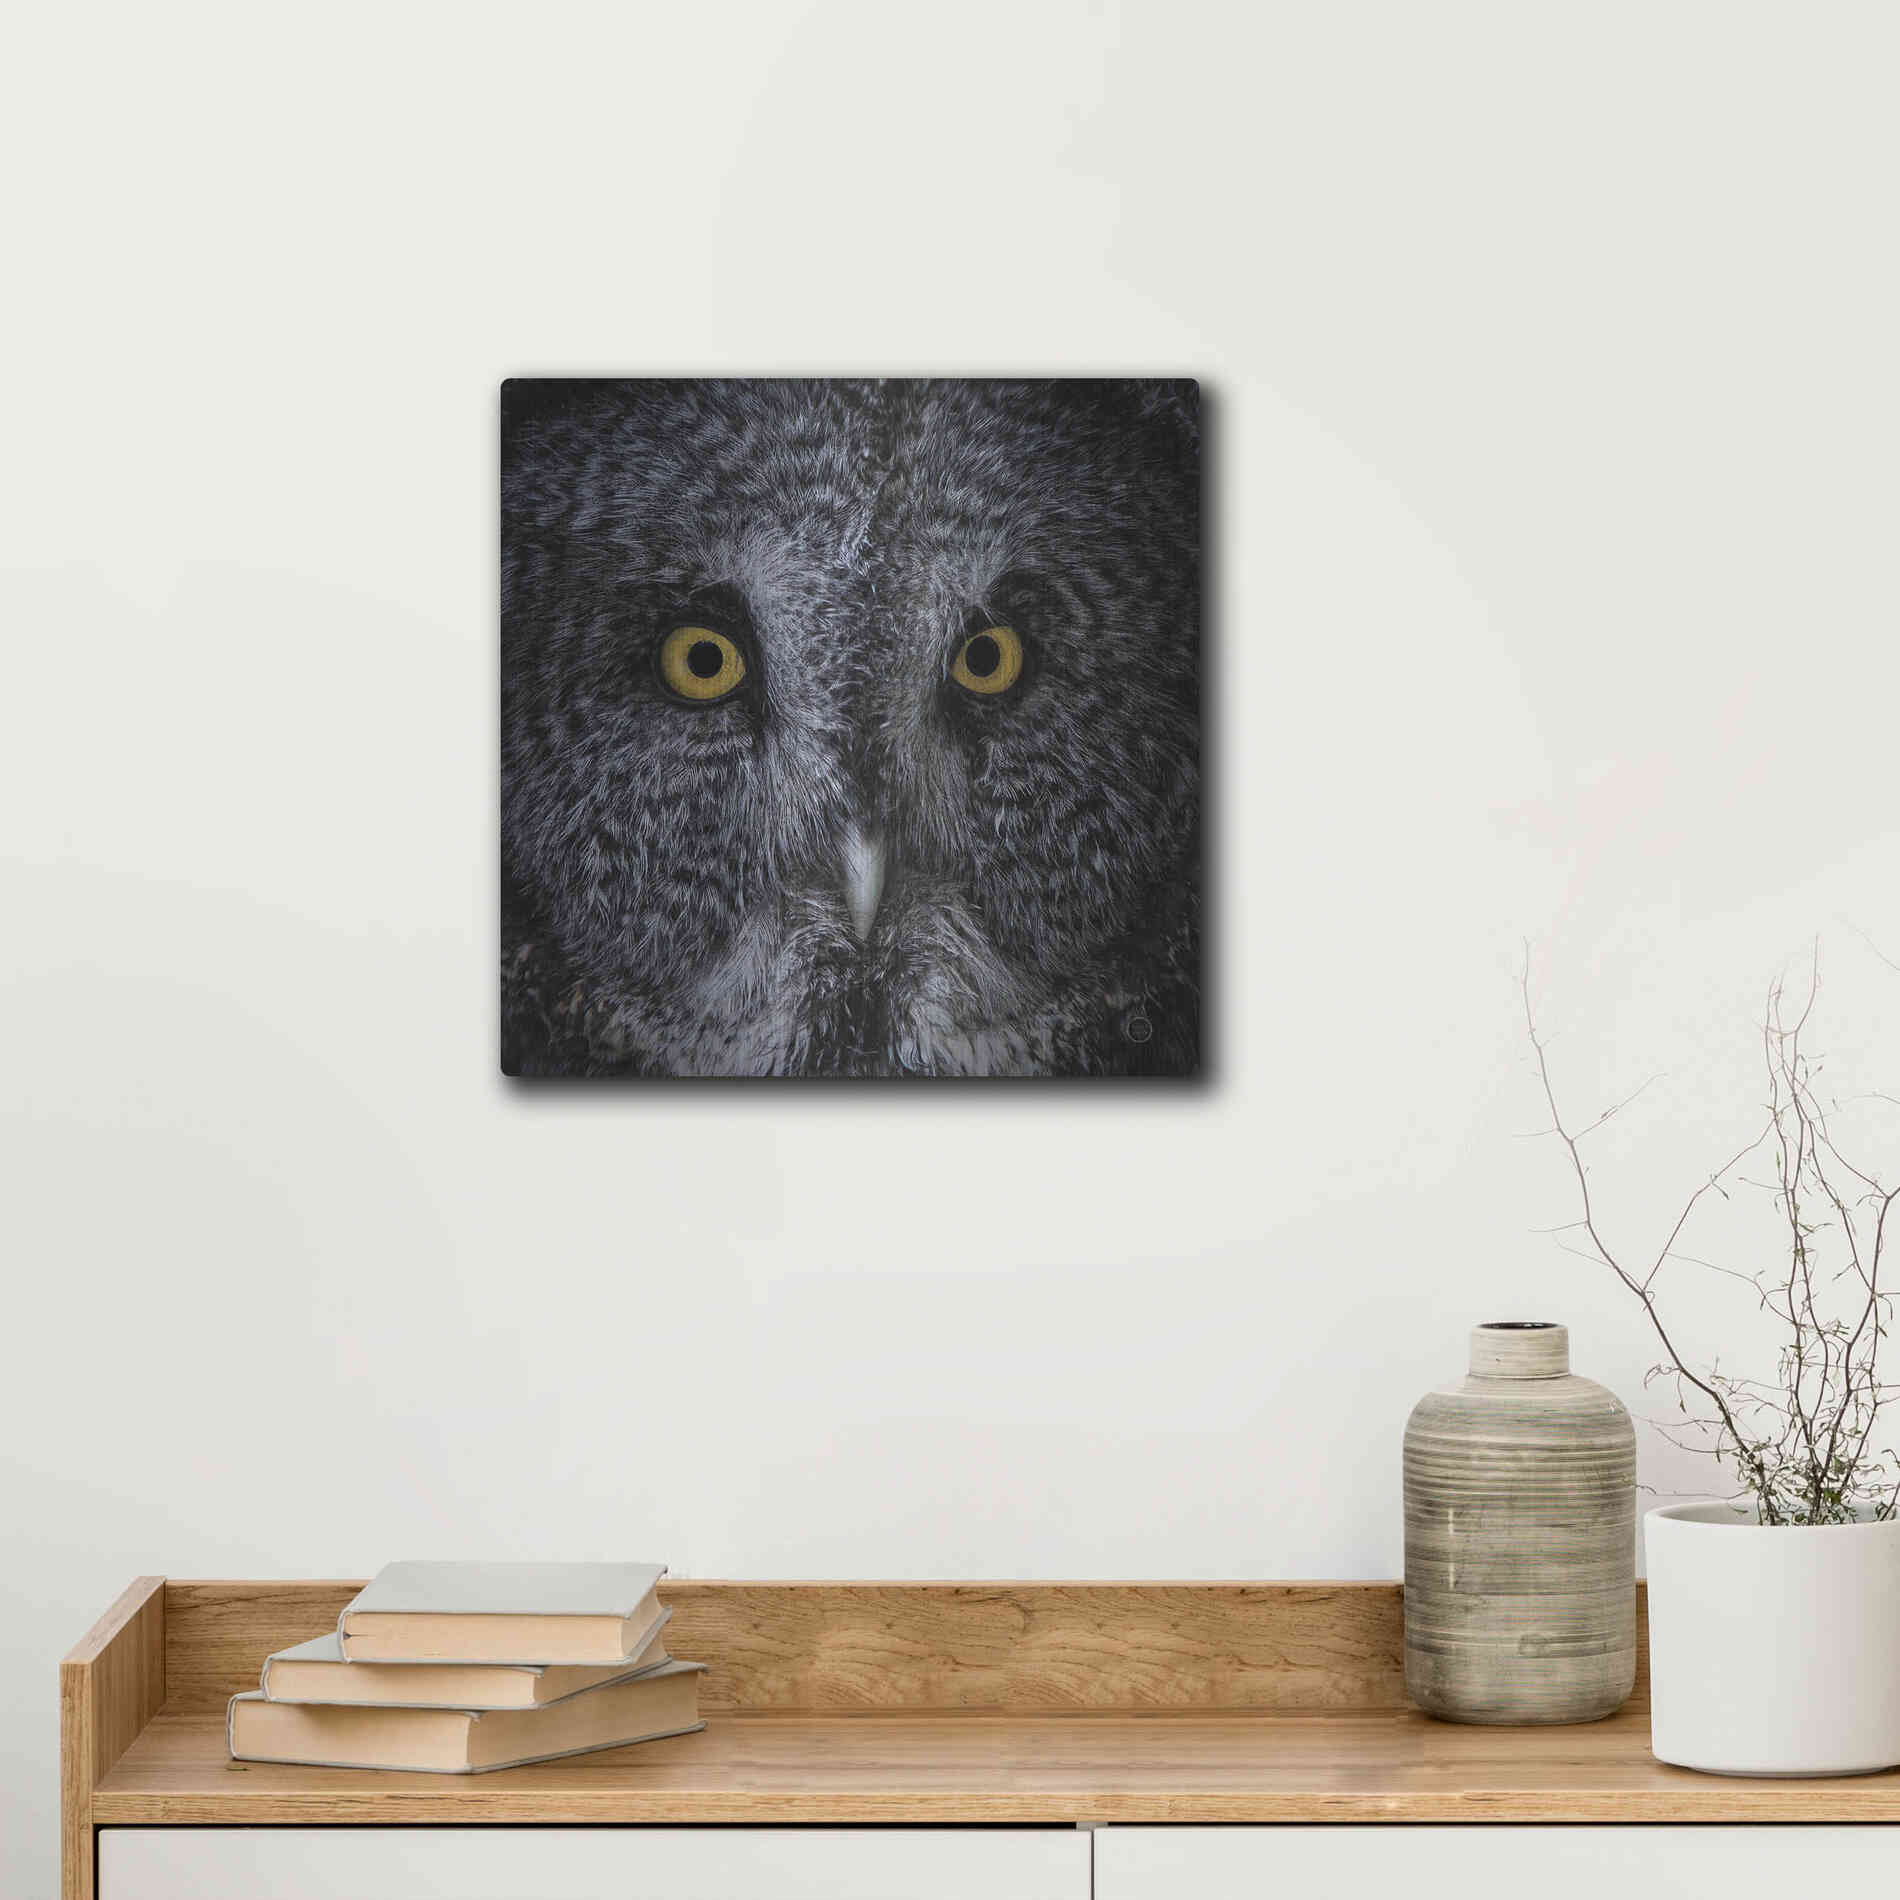 Luxe Metal Art 'Great Grey Owl' by Nathan Larson, Metal Wall Art,12x12